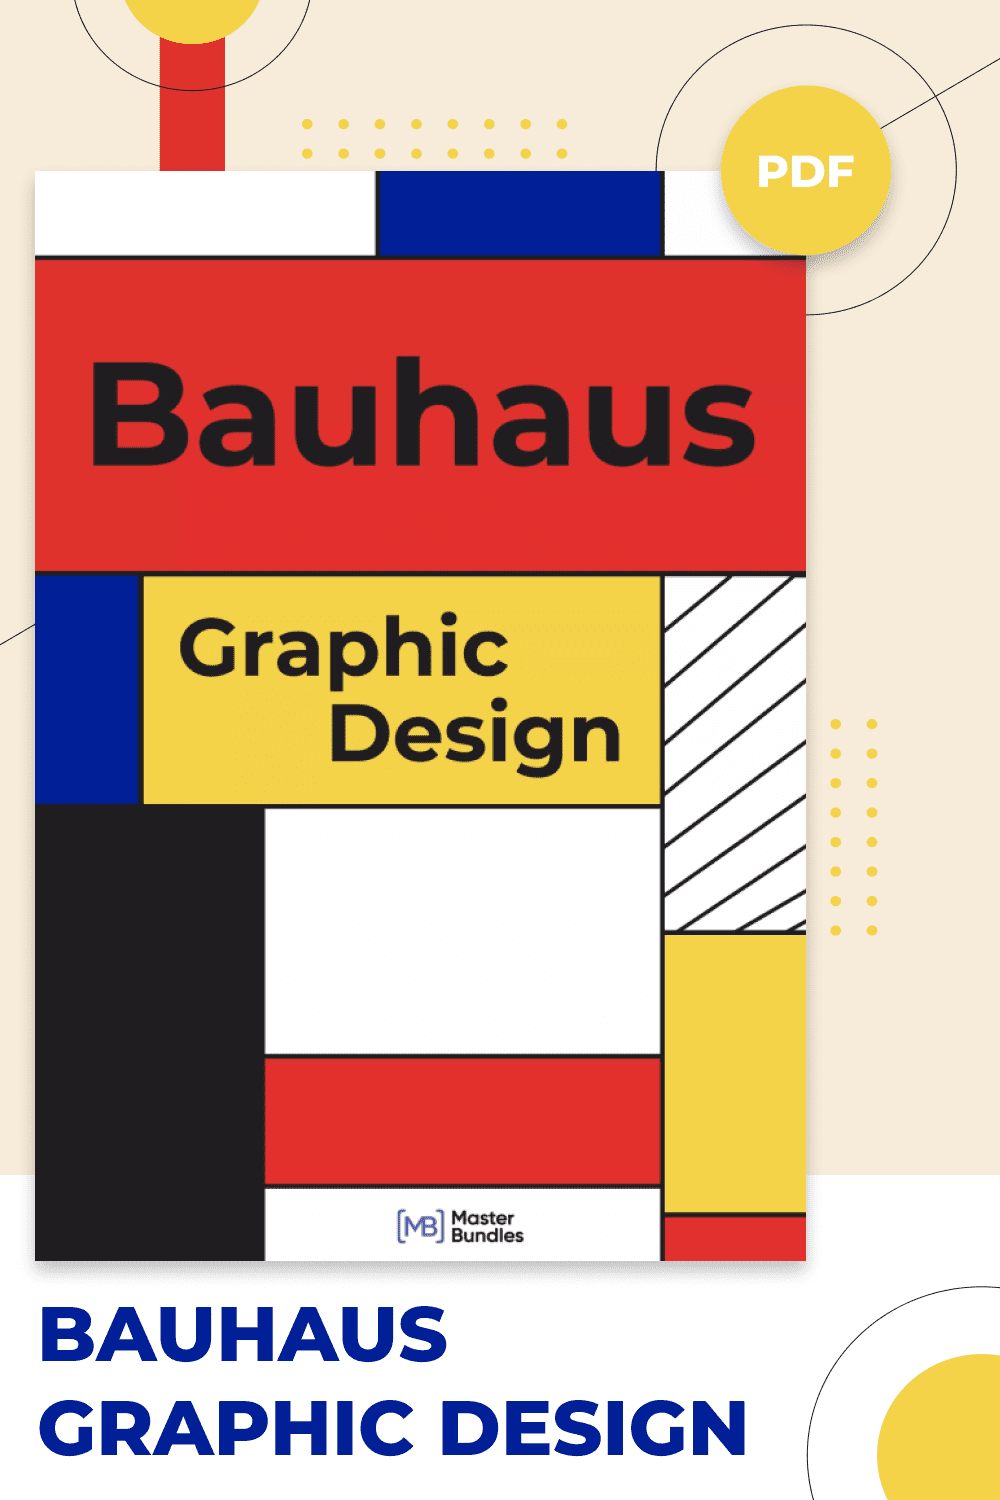 4 bauhaus graphic design how to convey complex meaning with simple solutions 93.